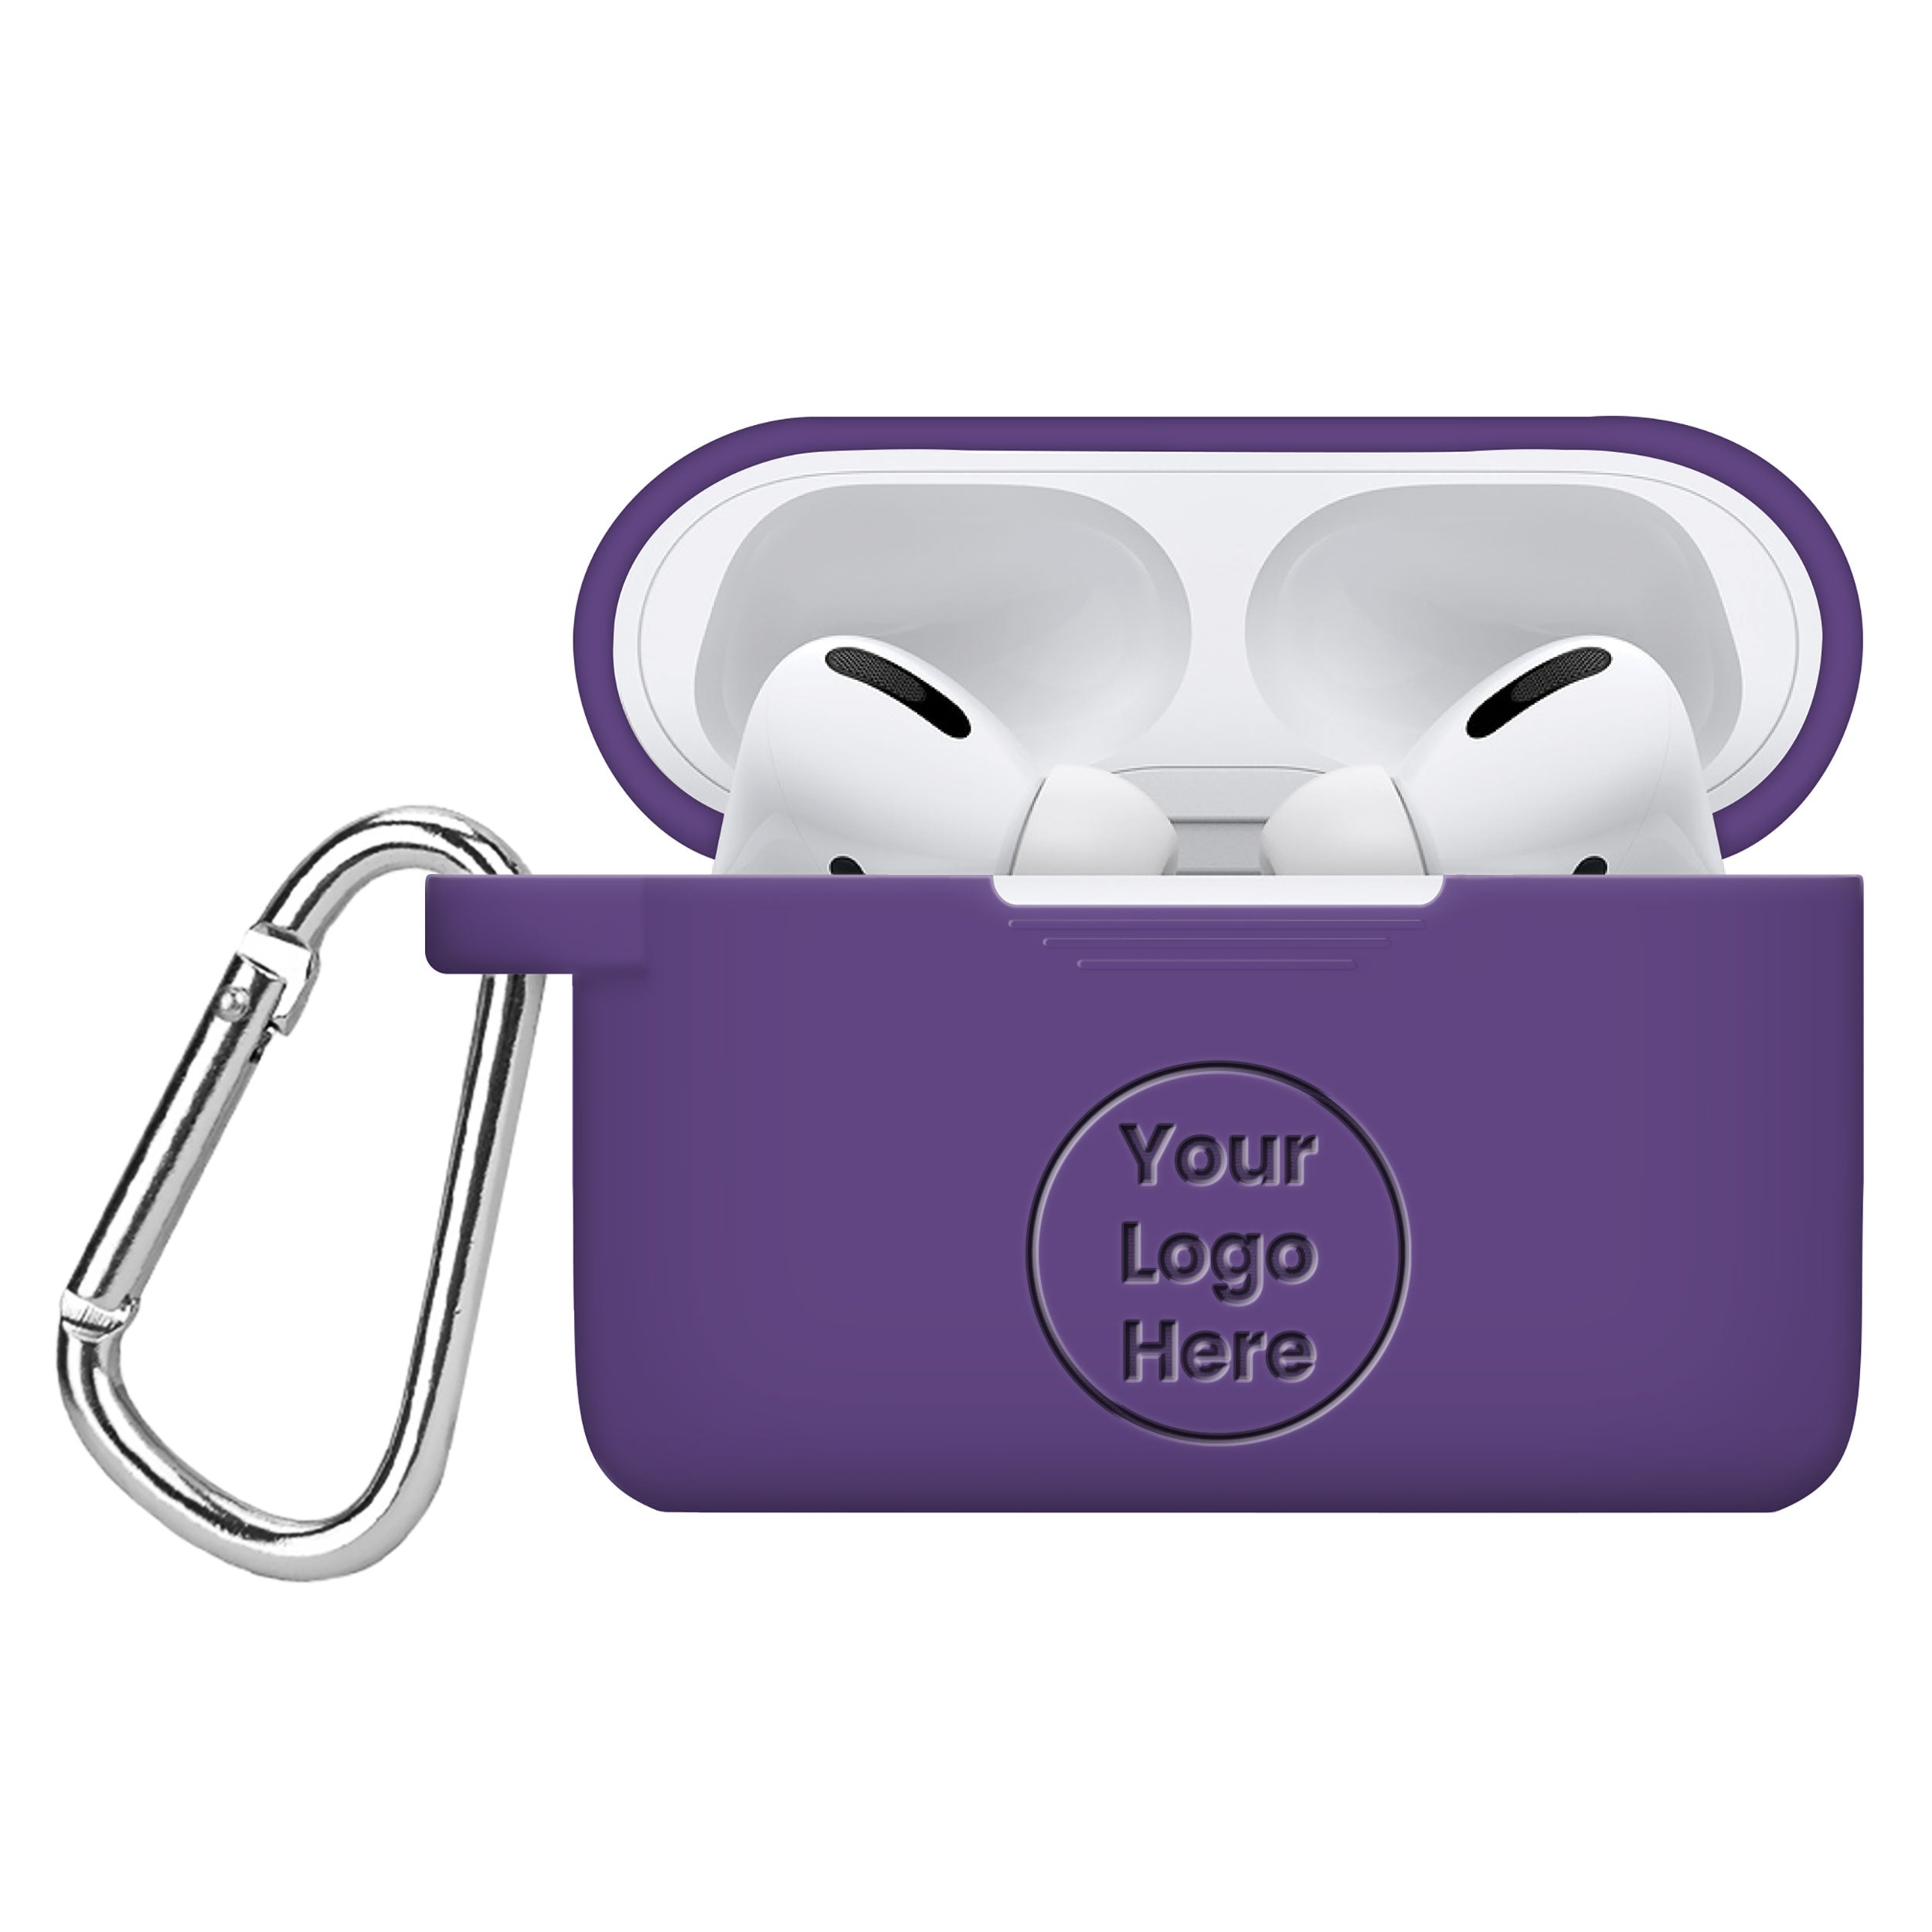 AirPod Case With Any Design Image or Logo Custom Case for 